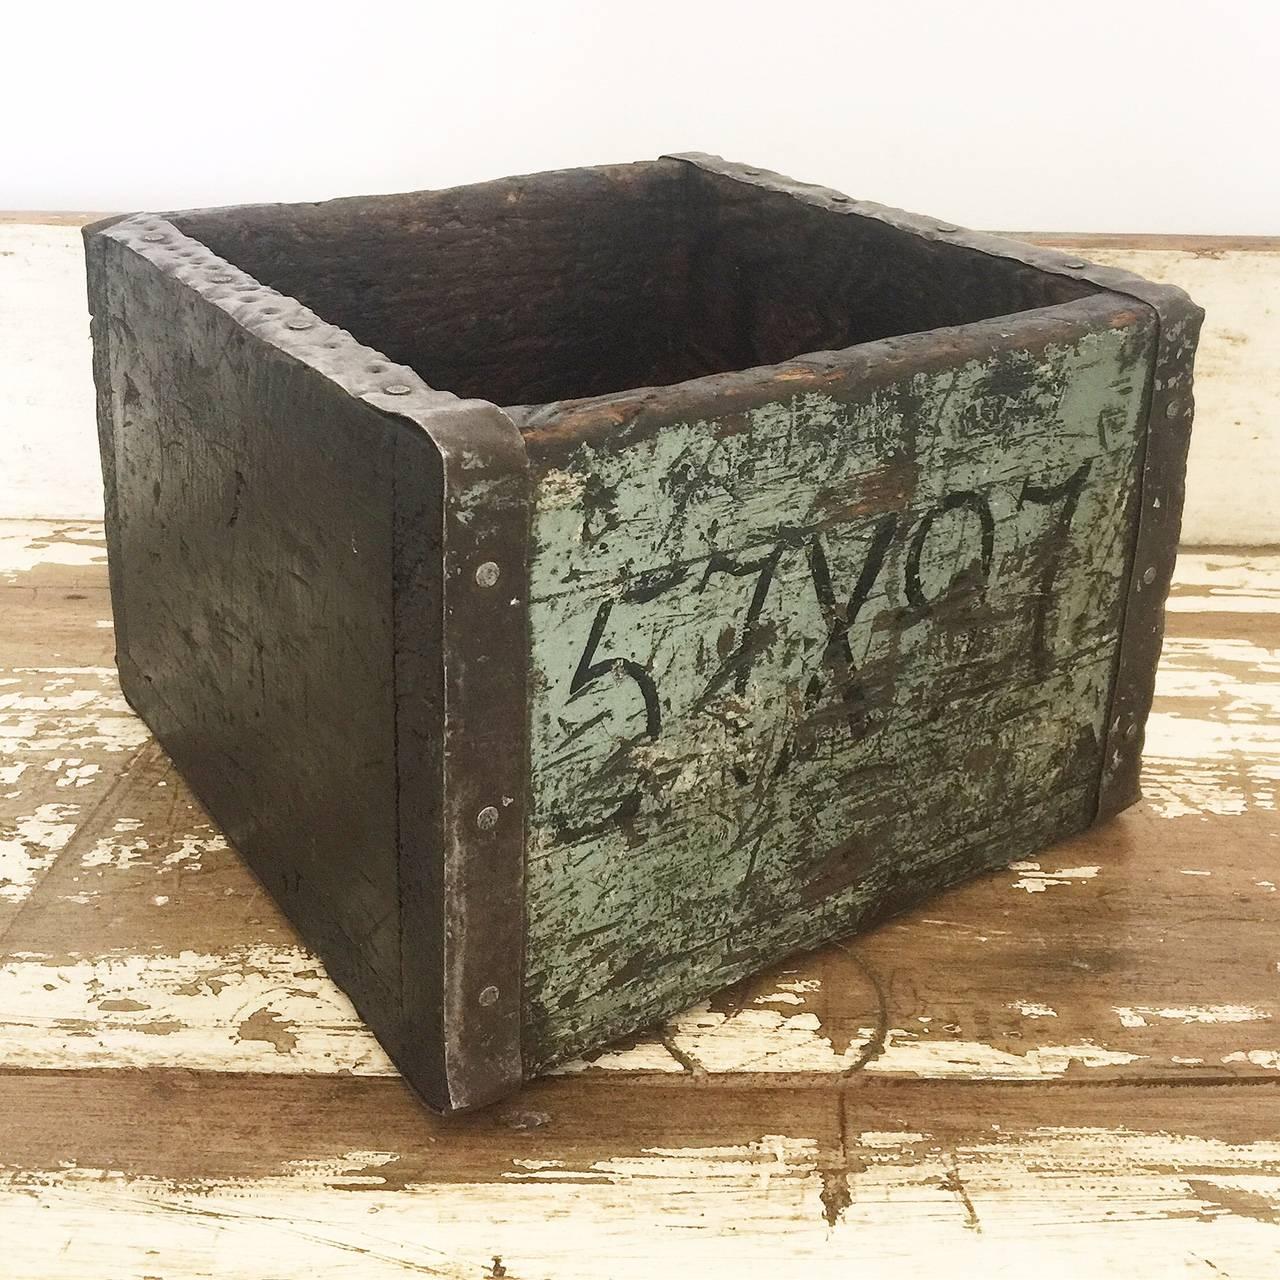 Vintage Industrial rustic naive crafted wooden storage box from an ironmongers shop.